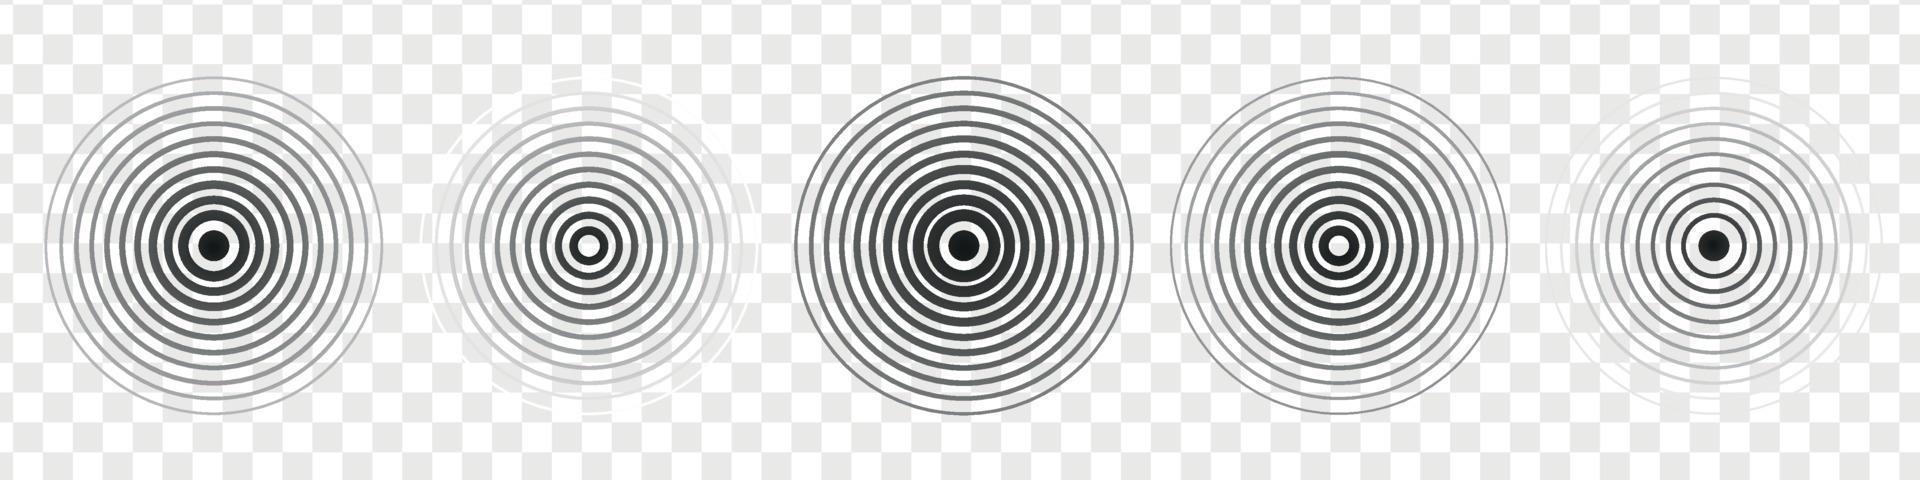 Sonar sound wave. Signal concentric circle. vibrations radial signal. Vector isolated illustration